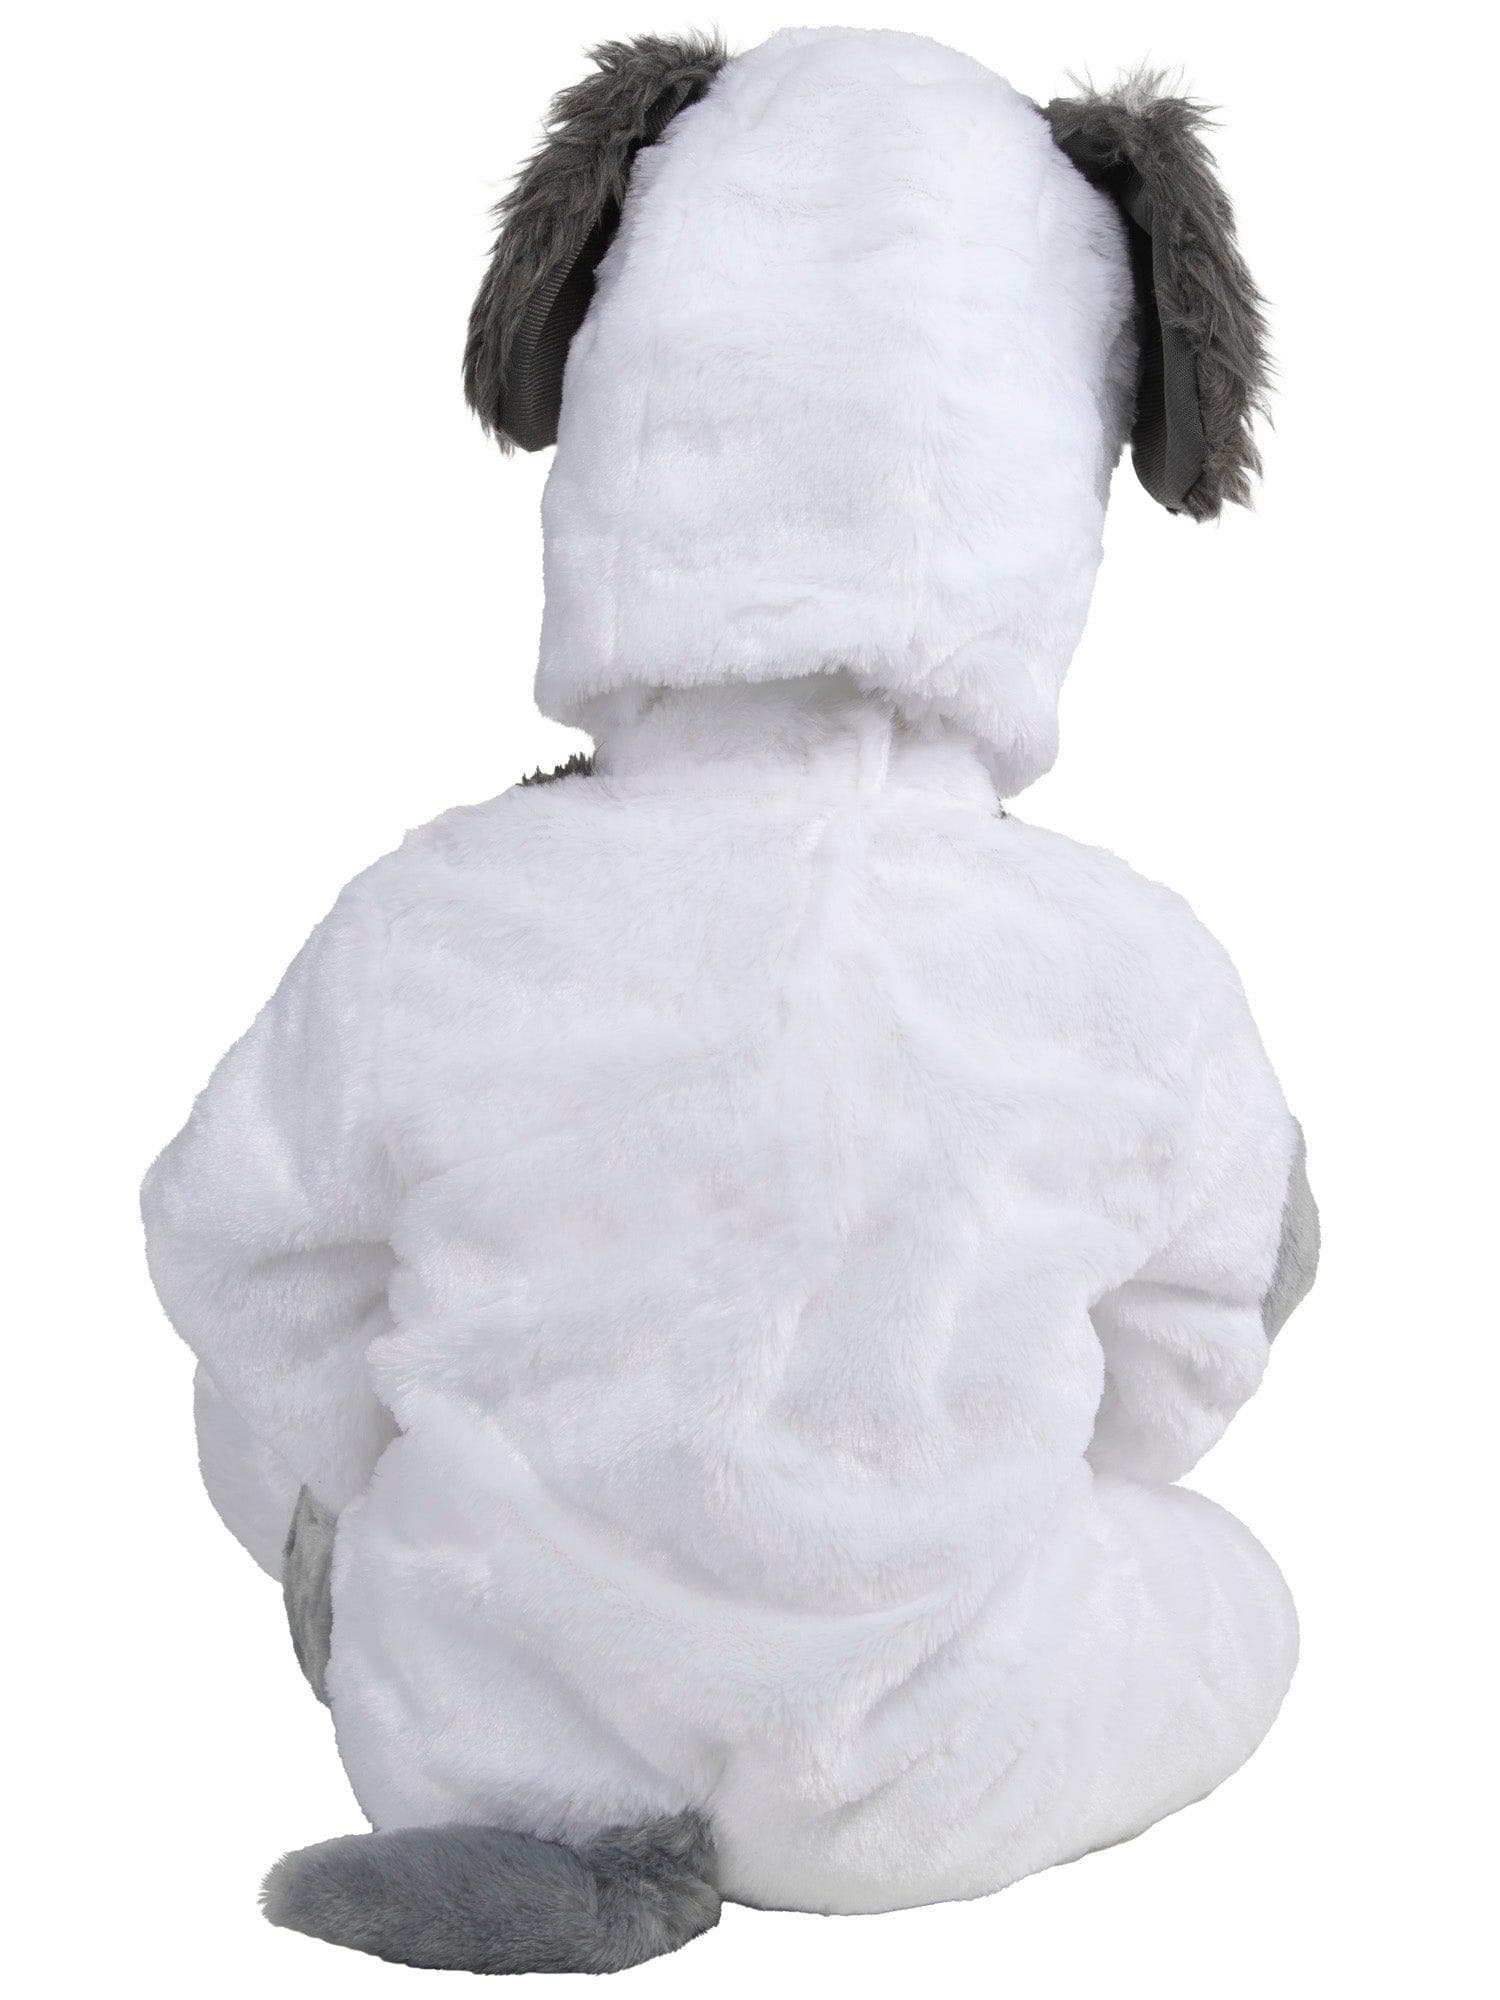 Puppy Dog Baby/Toddler Costume - costumes.com